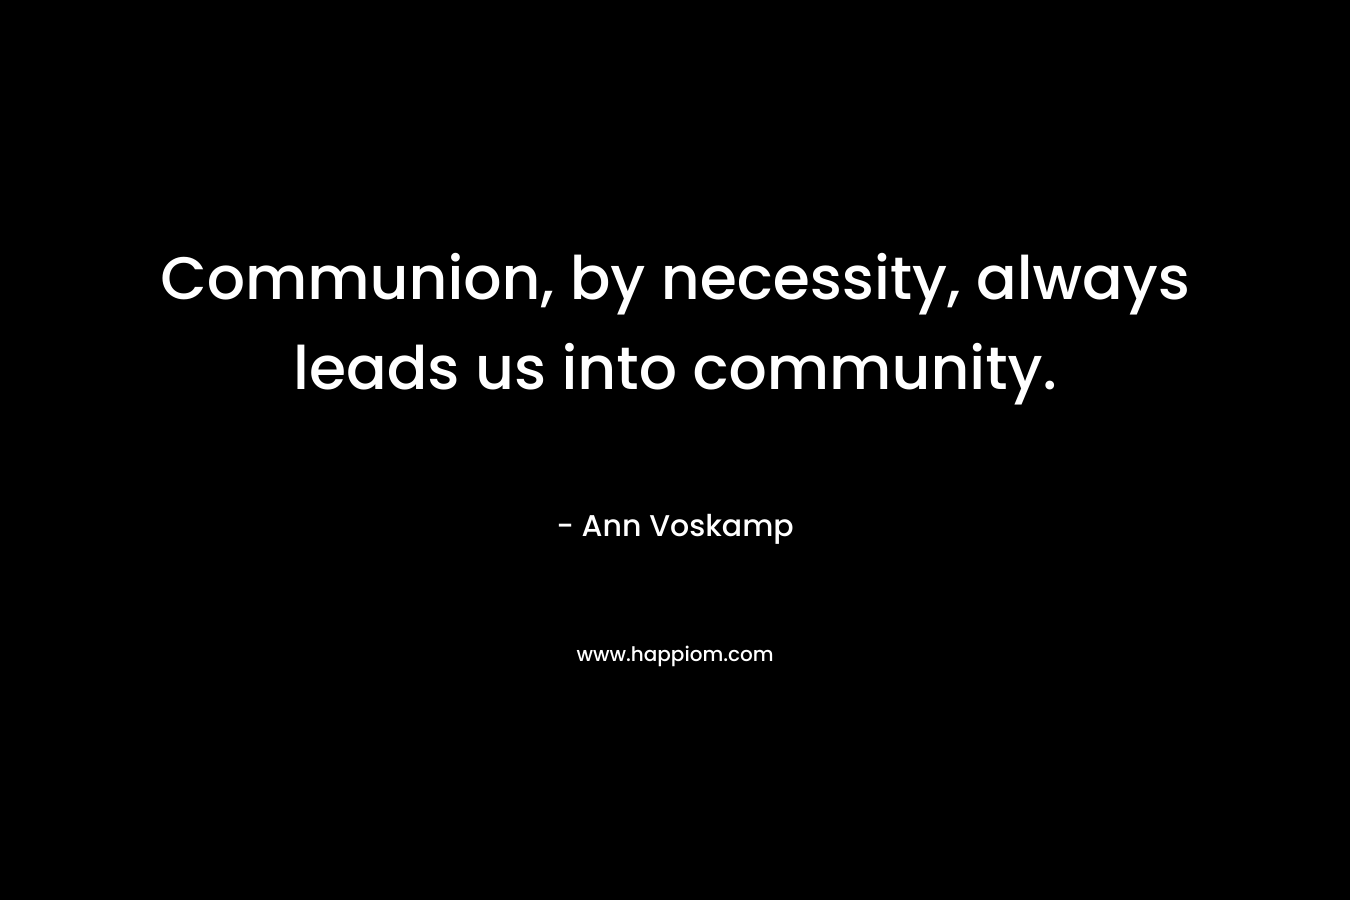 Communion, by necessity, always leads us into community.